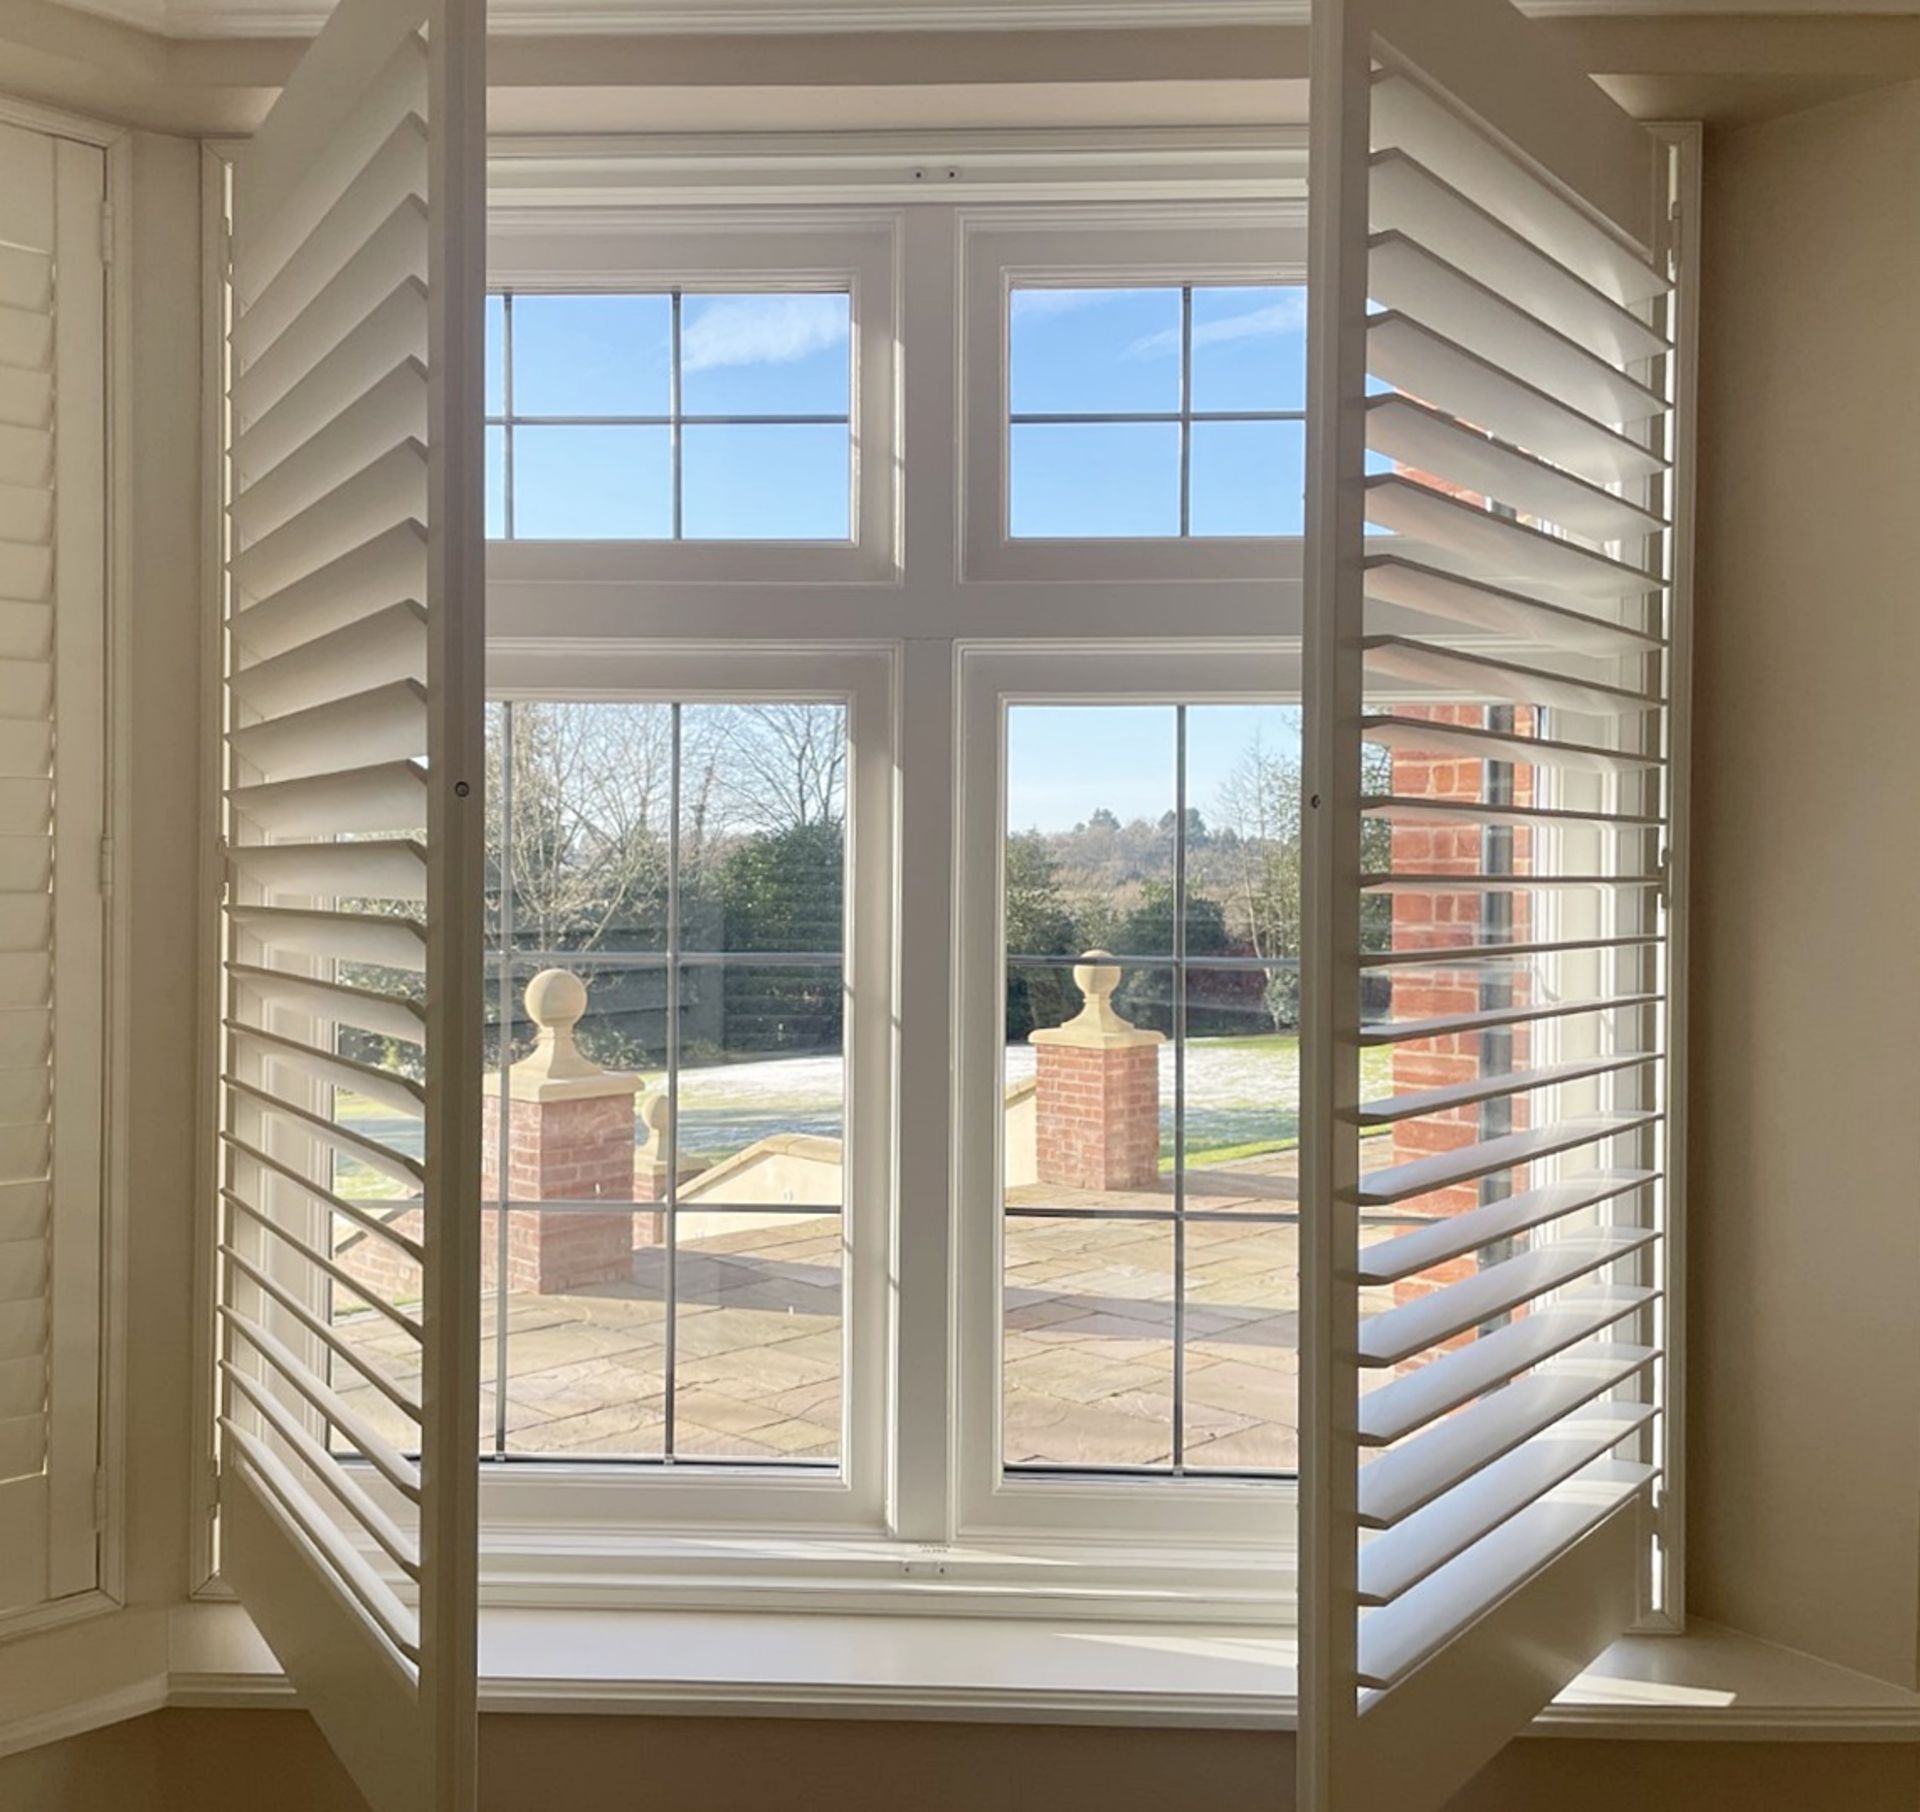 1 x Hardwood Timber Double Glazed Window Frames fitted with Shutter Blinds, In White - Ref: PAN104